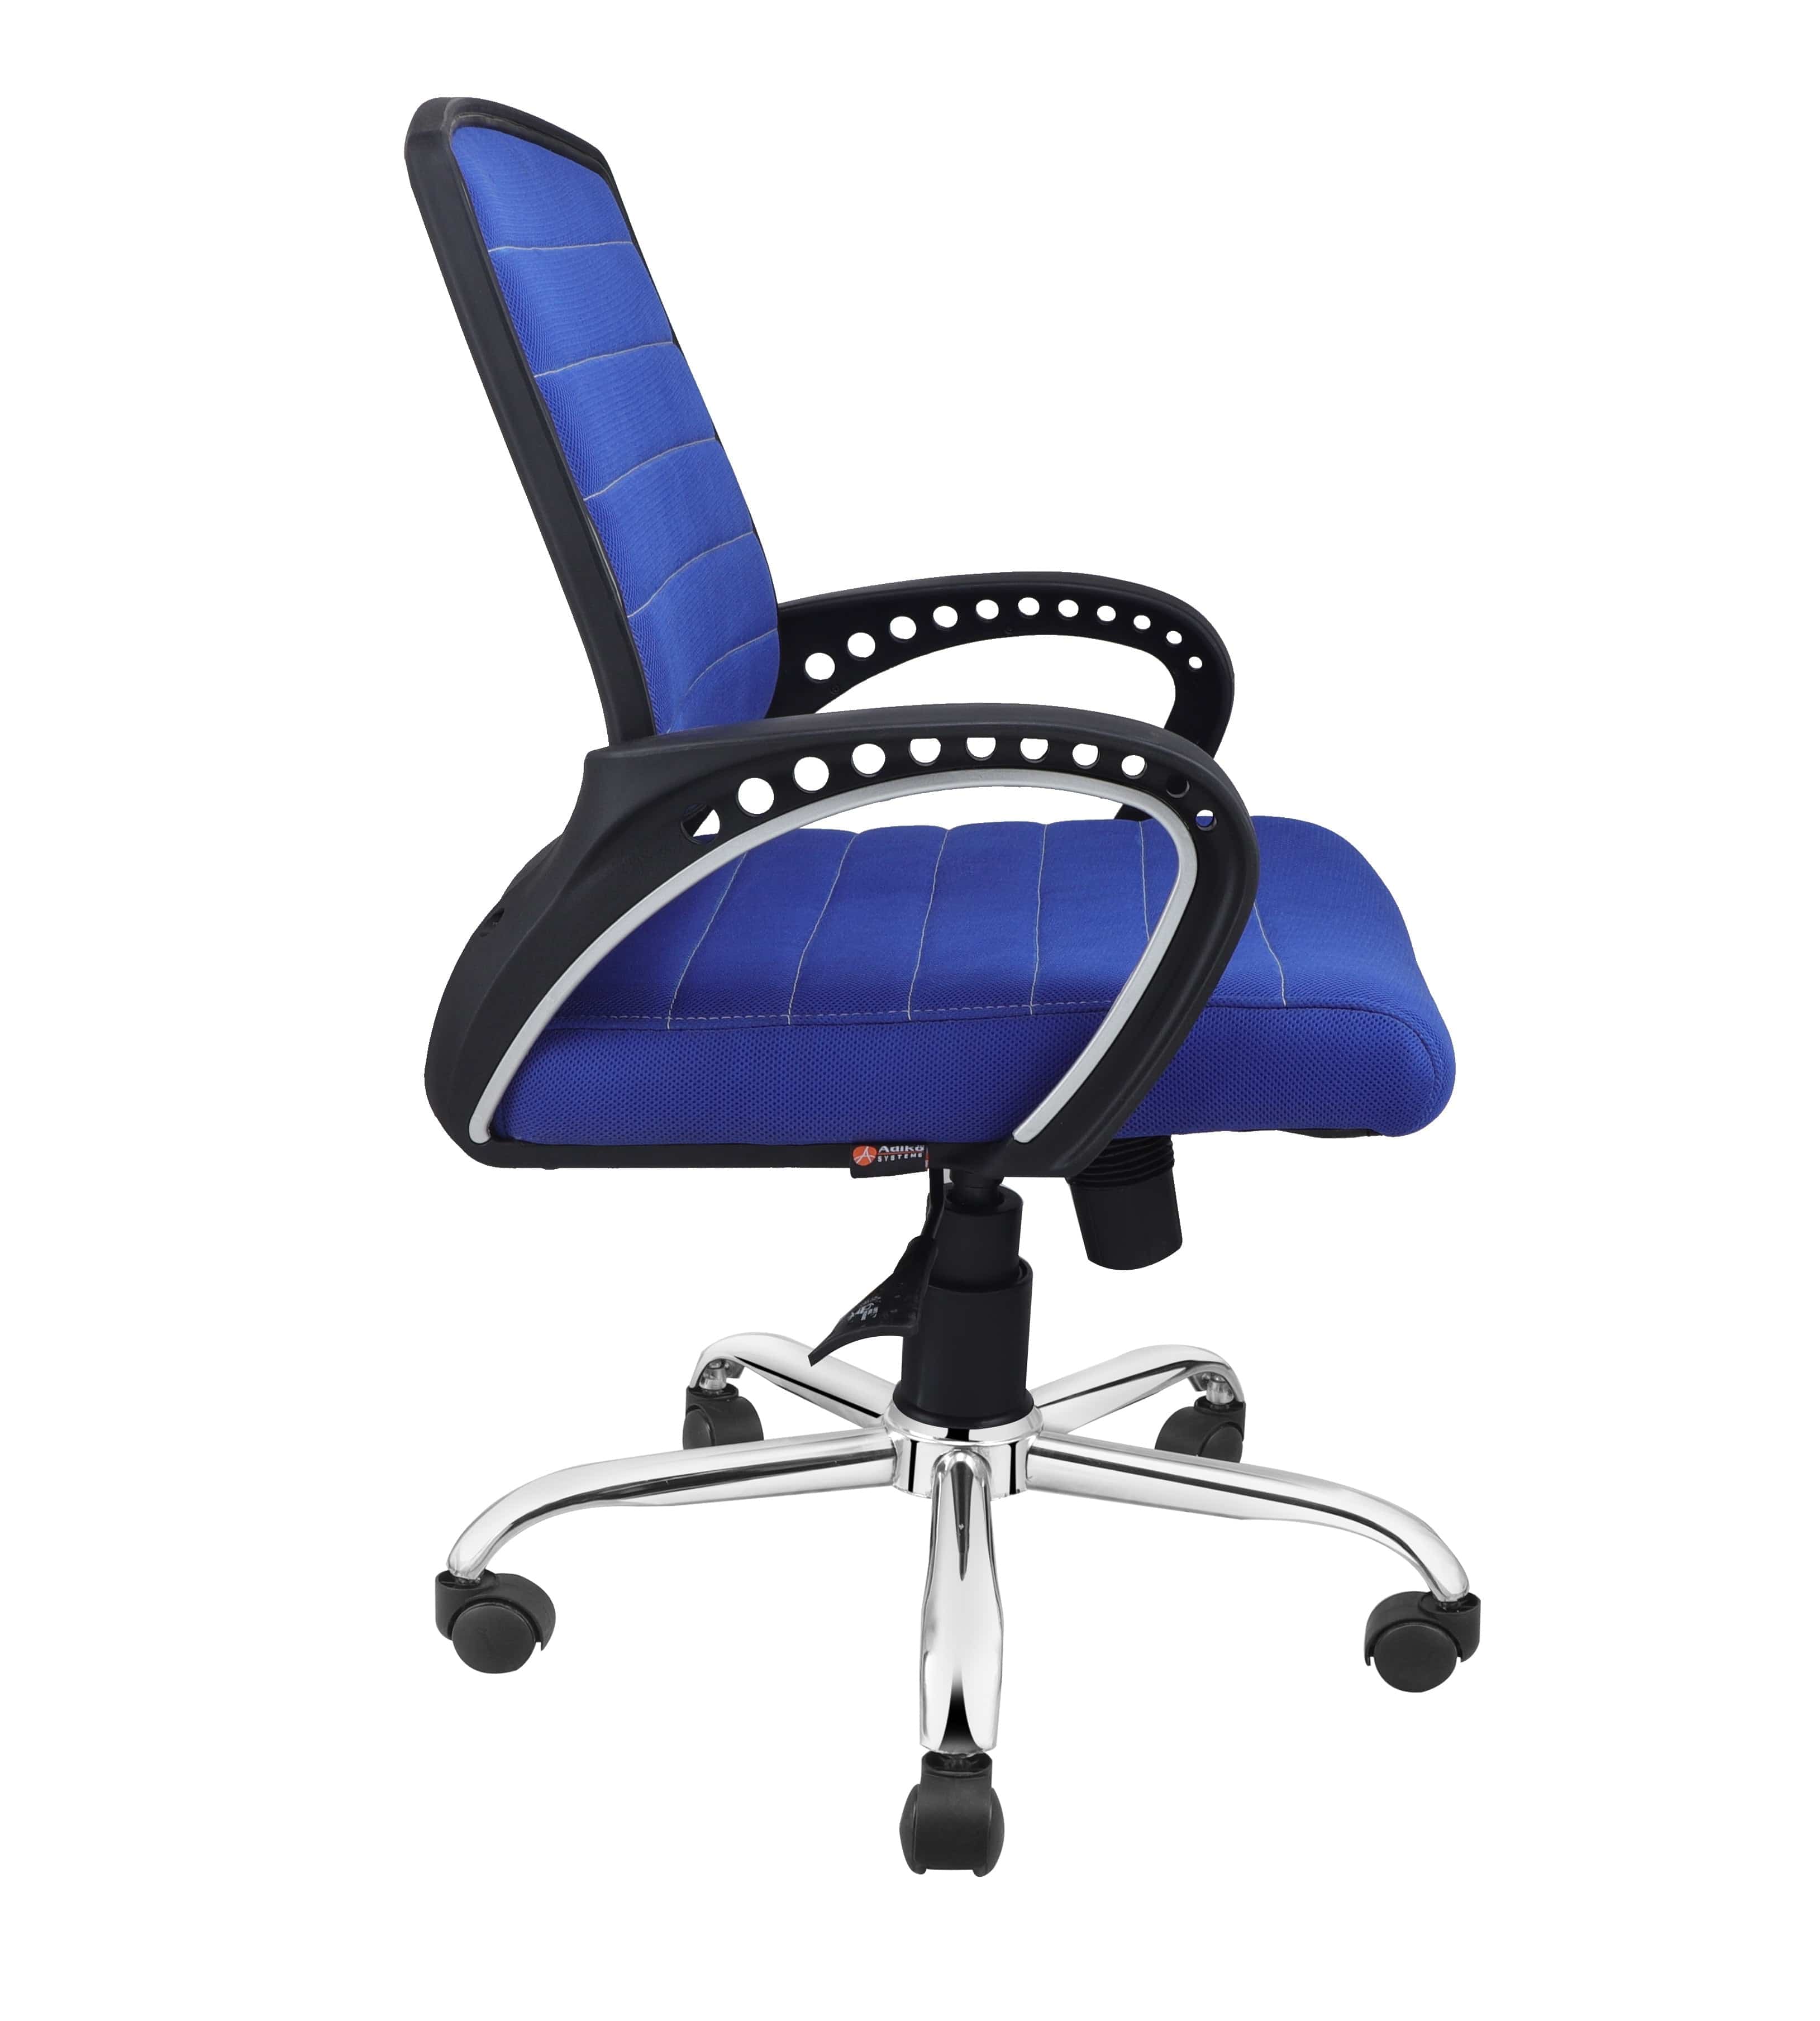 Smart Ergonomic Chair With Breathable Blue Mesh Fabric